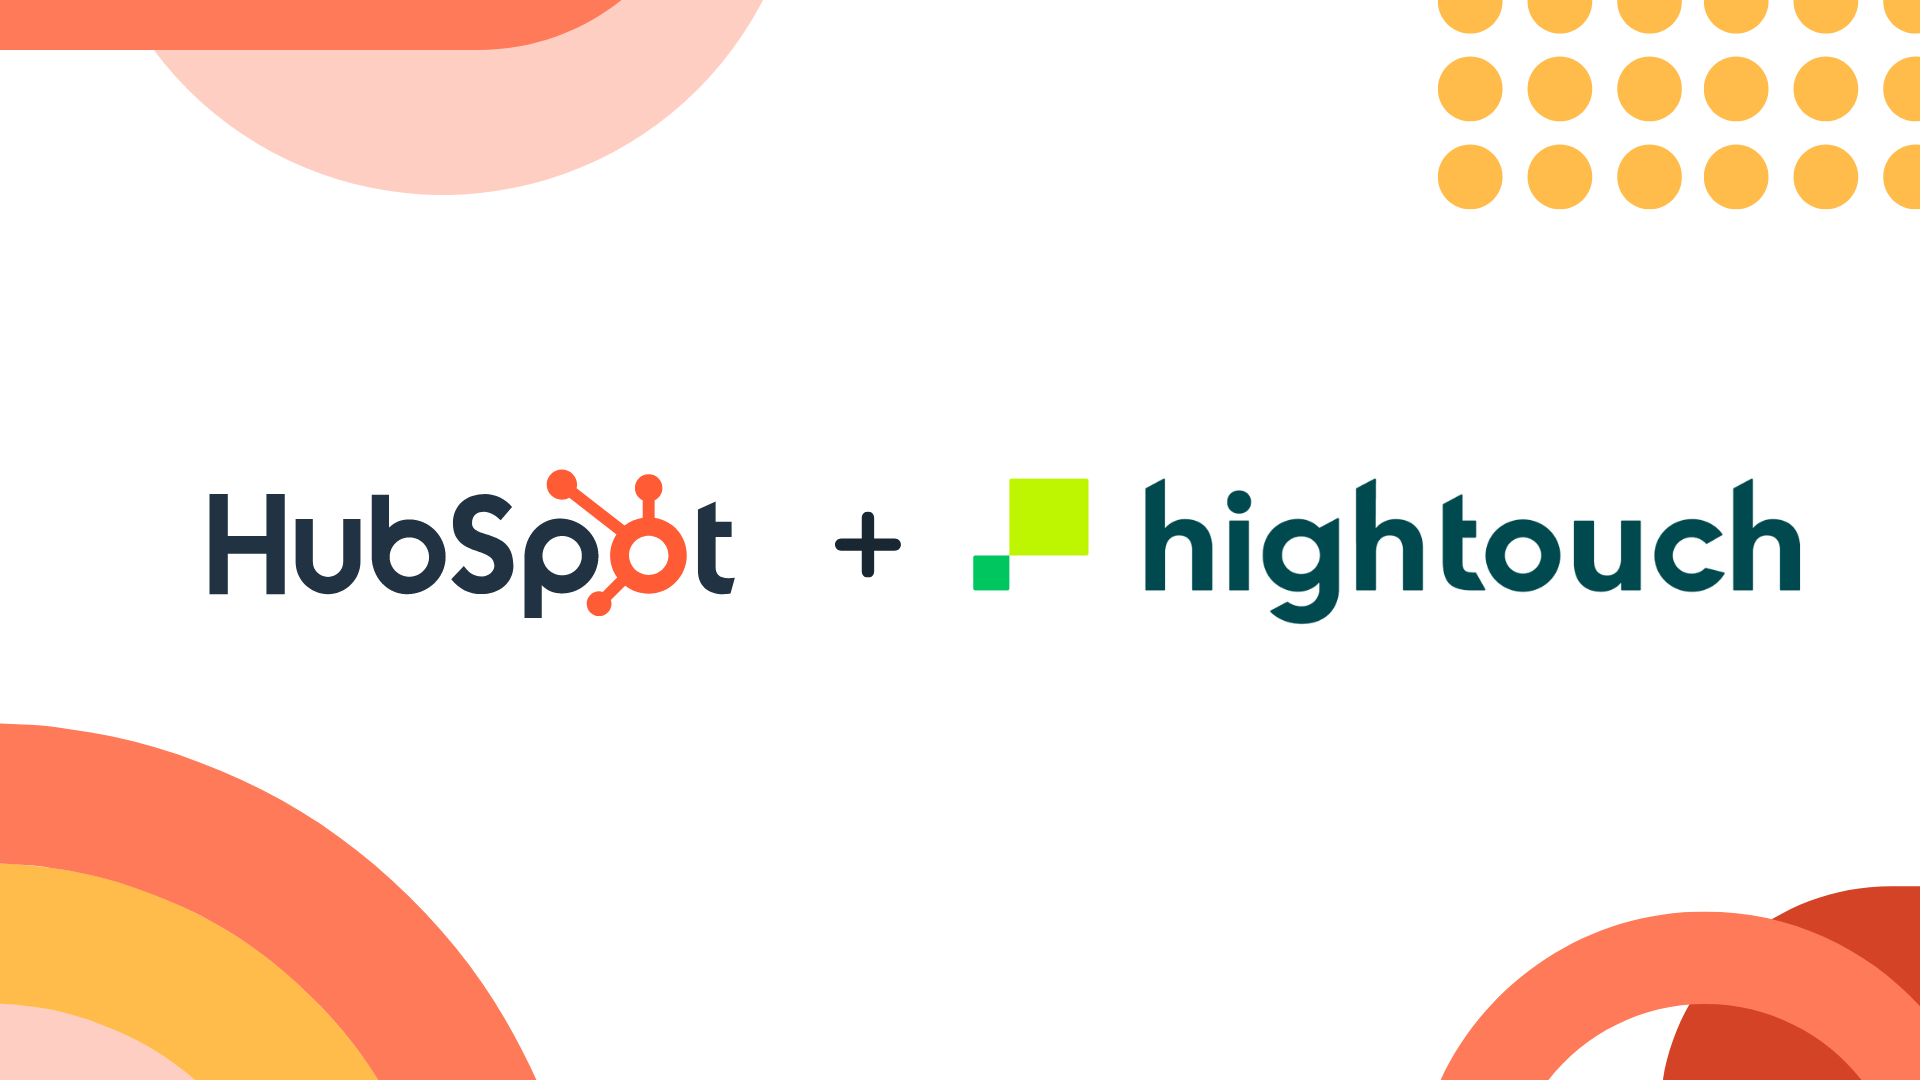 HubSpot Invests in Hightouch to Help Businesses Harness the Power of Data